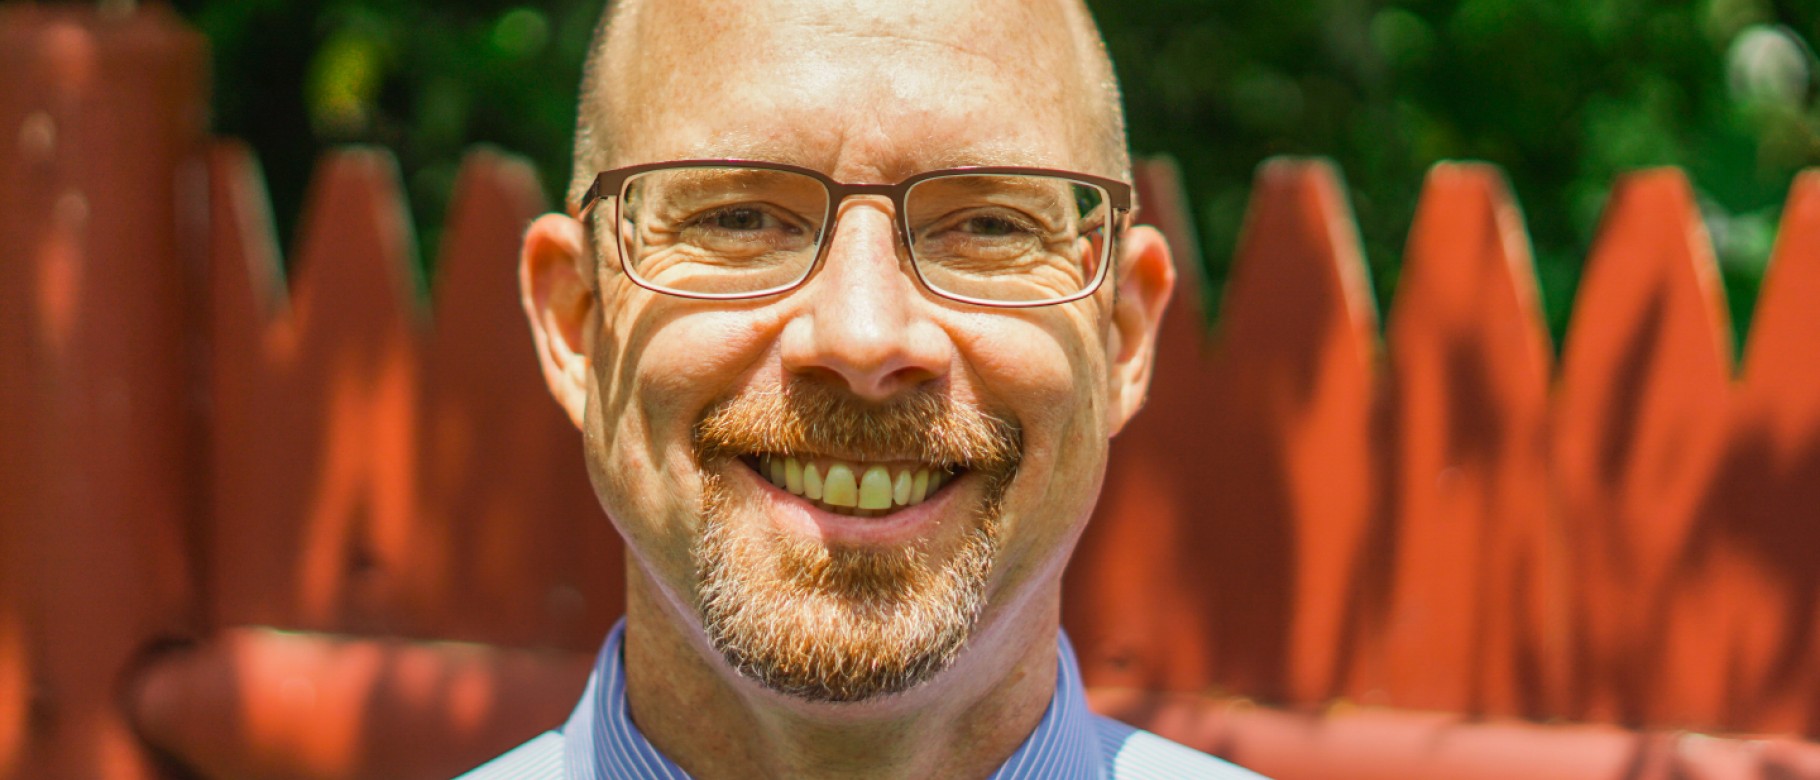 Marc Ebenfield to become director of Center for Excellence in Teaching and Learning